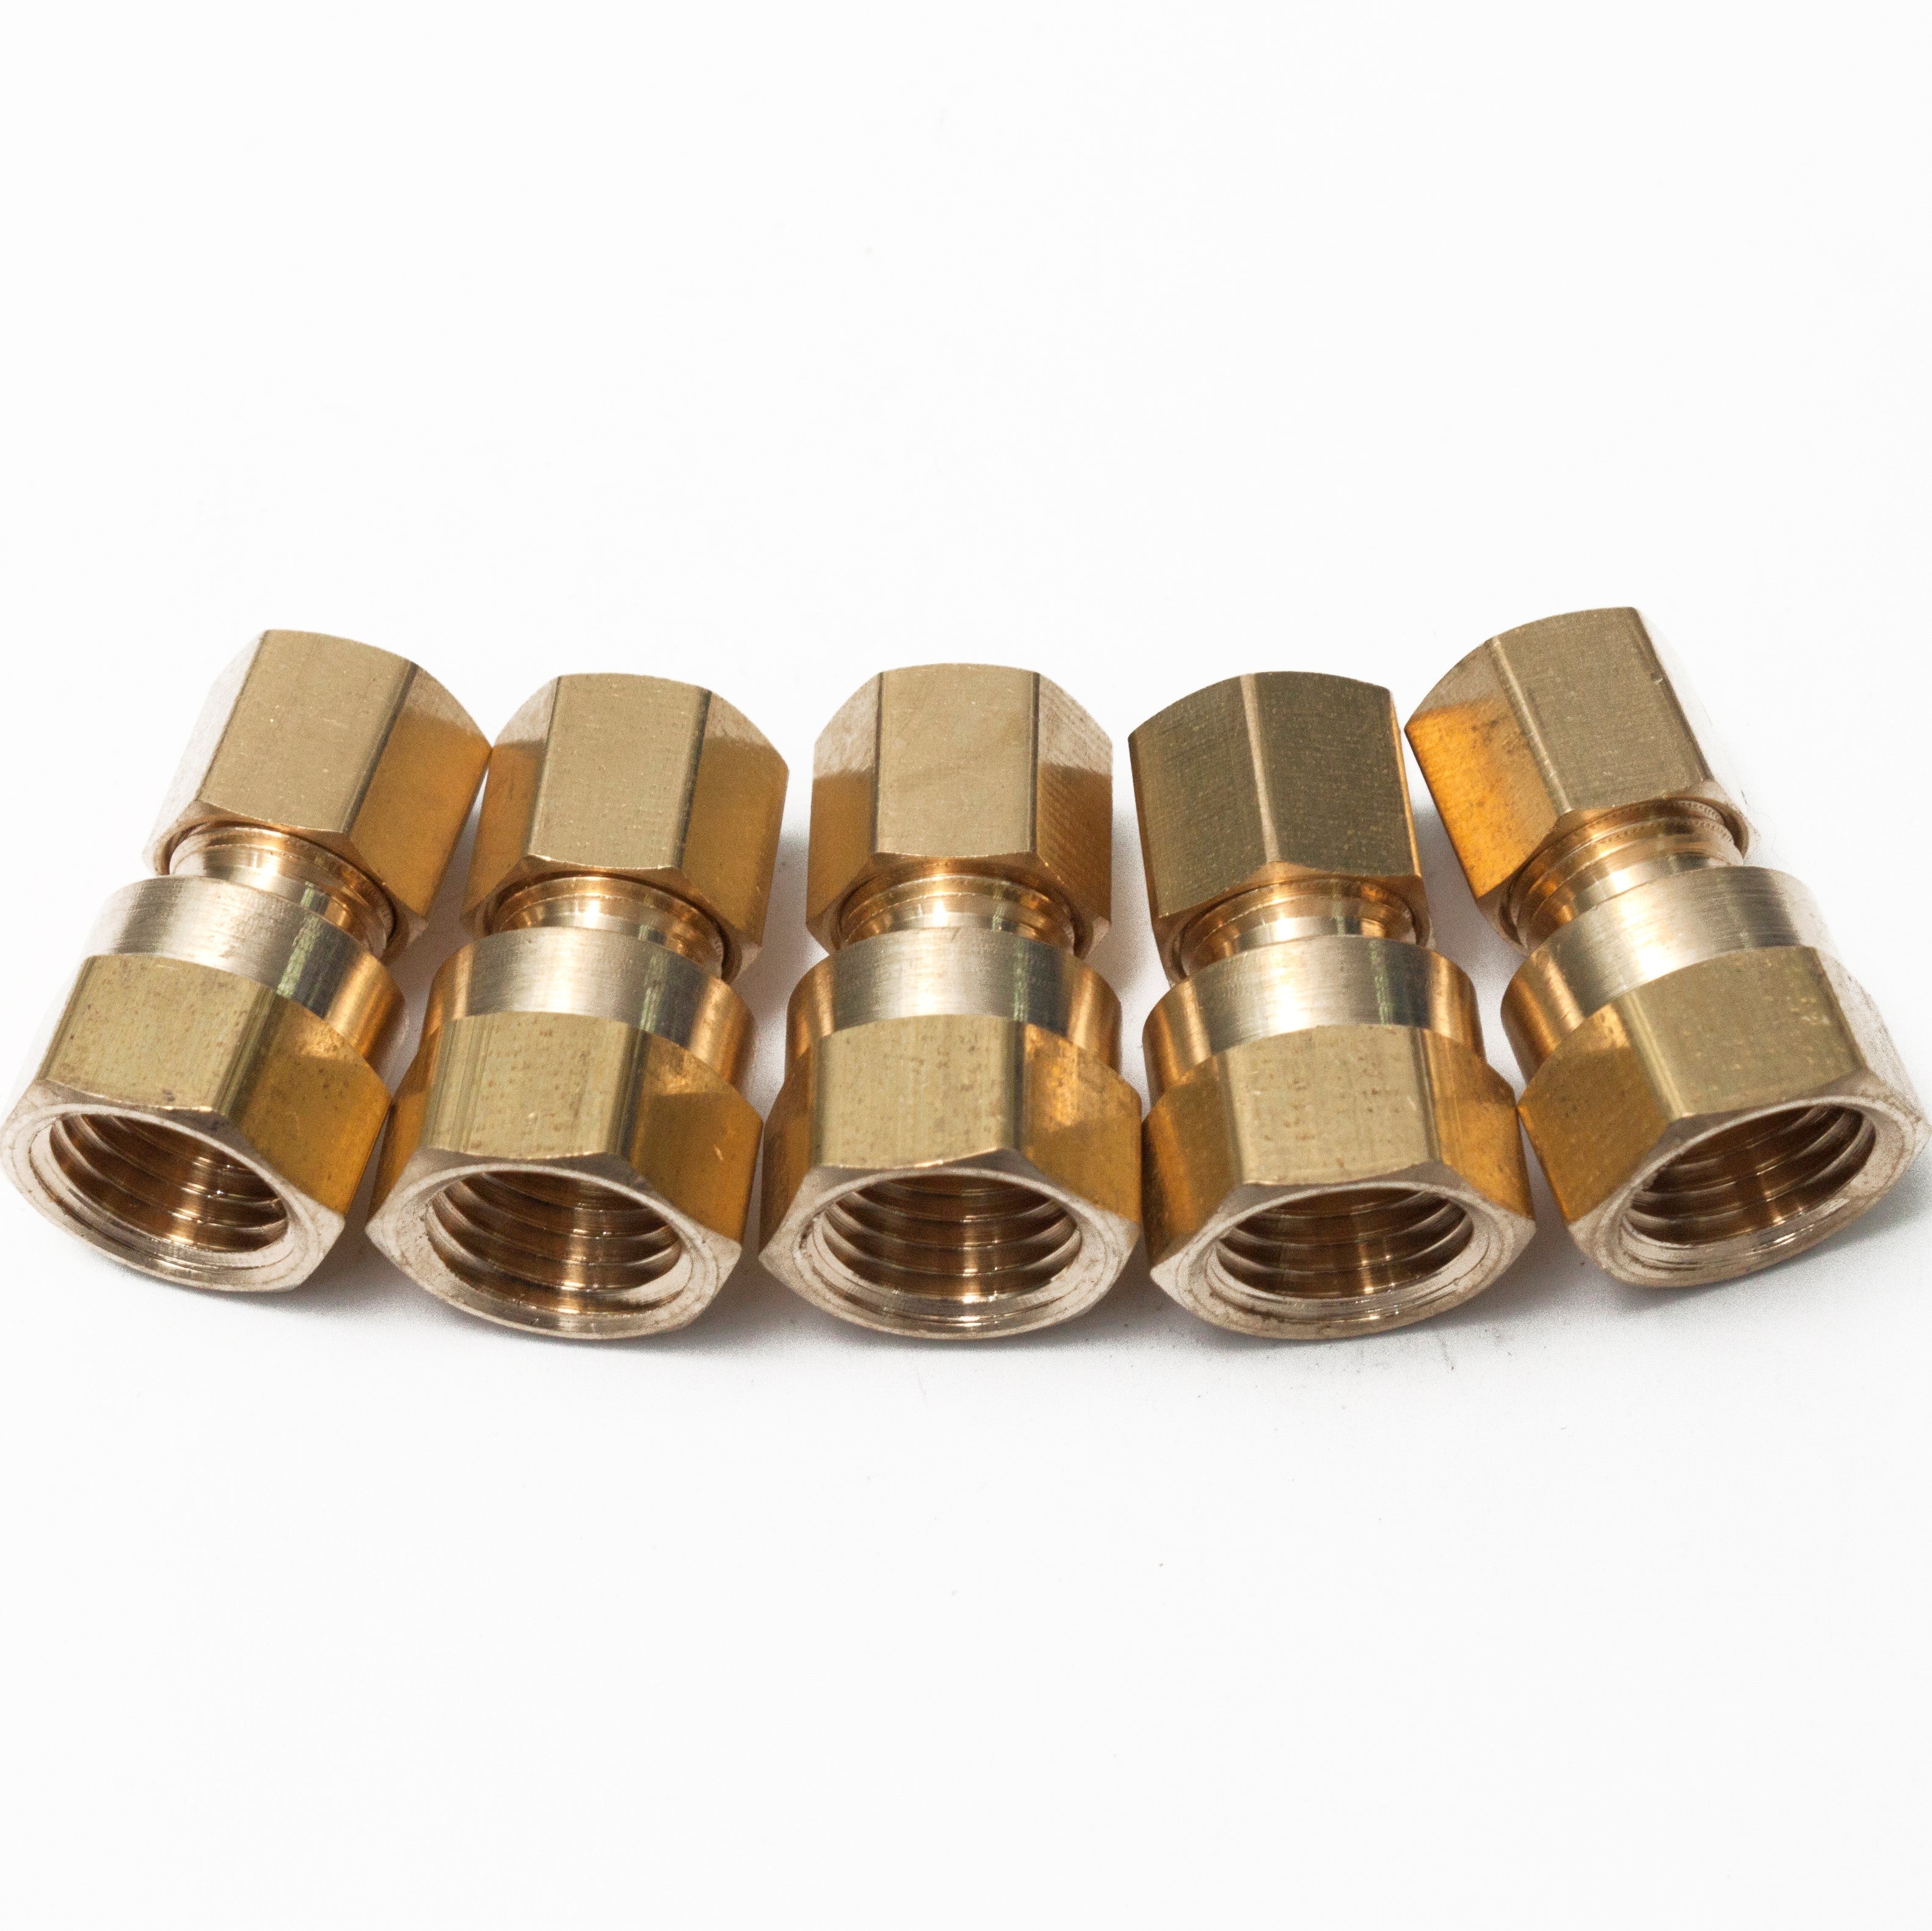 LTWFITTING Brass 3/8-Inch OD x 1/4-Inch Female NPT Compression Connector Fitting(Pack of 5)